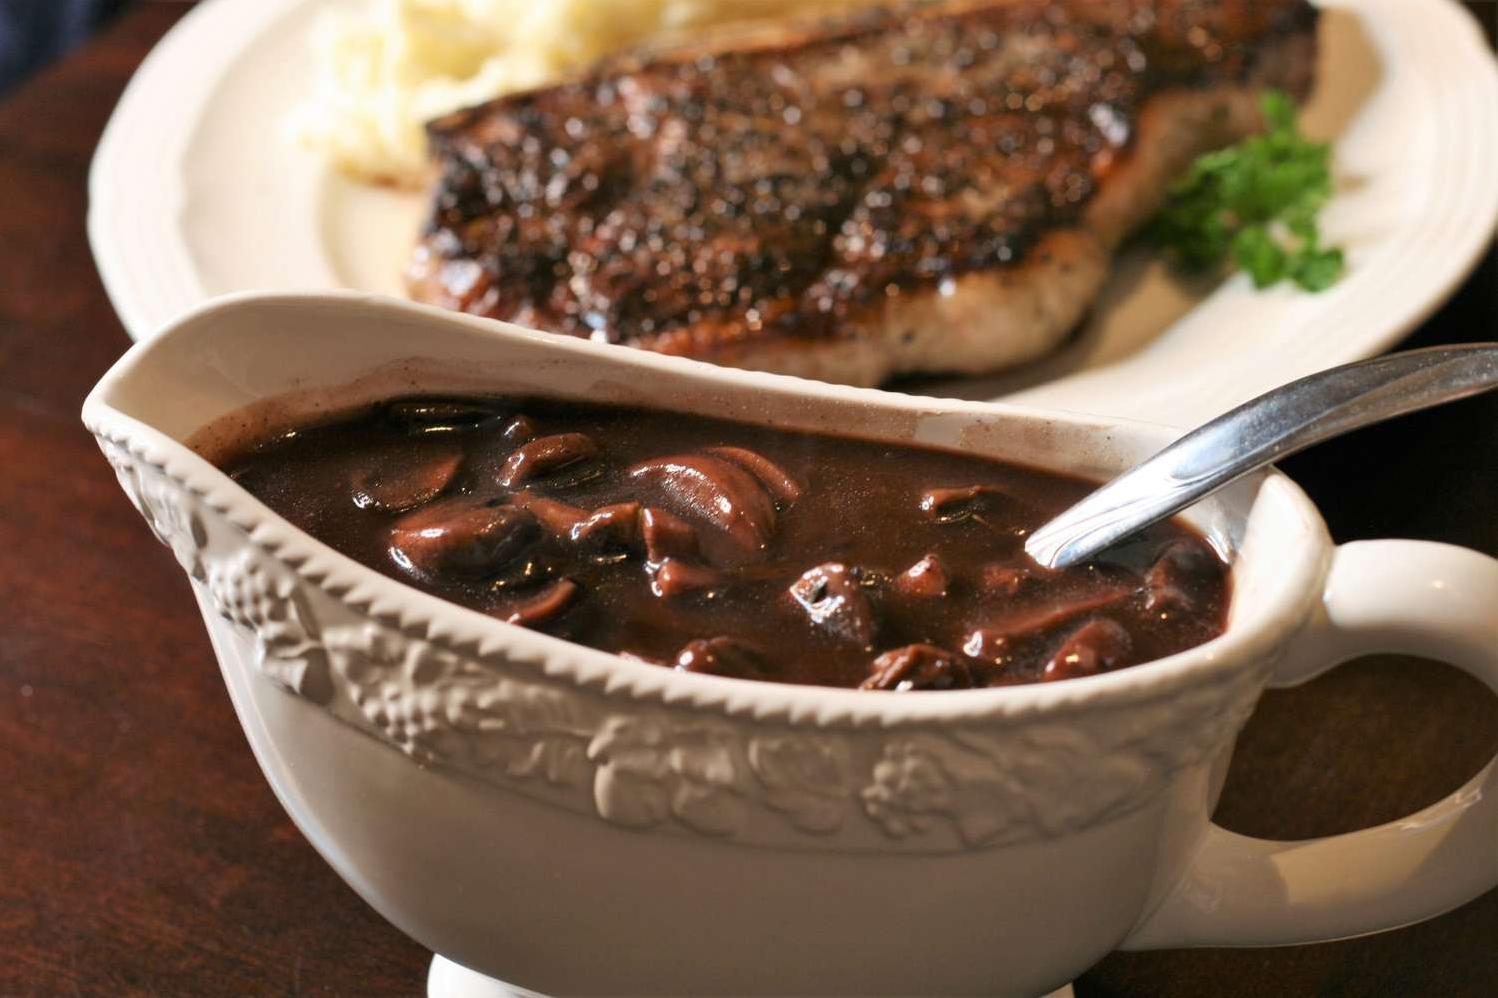  Enjoy a velvety and rich sauce filled with umami from mushrooms and red wine.